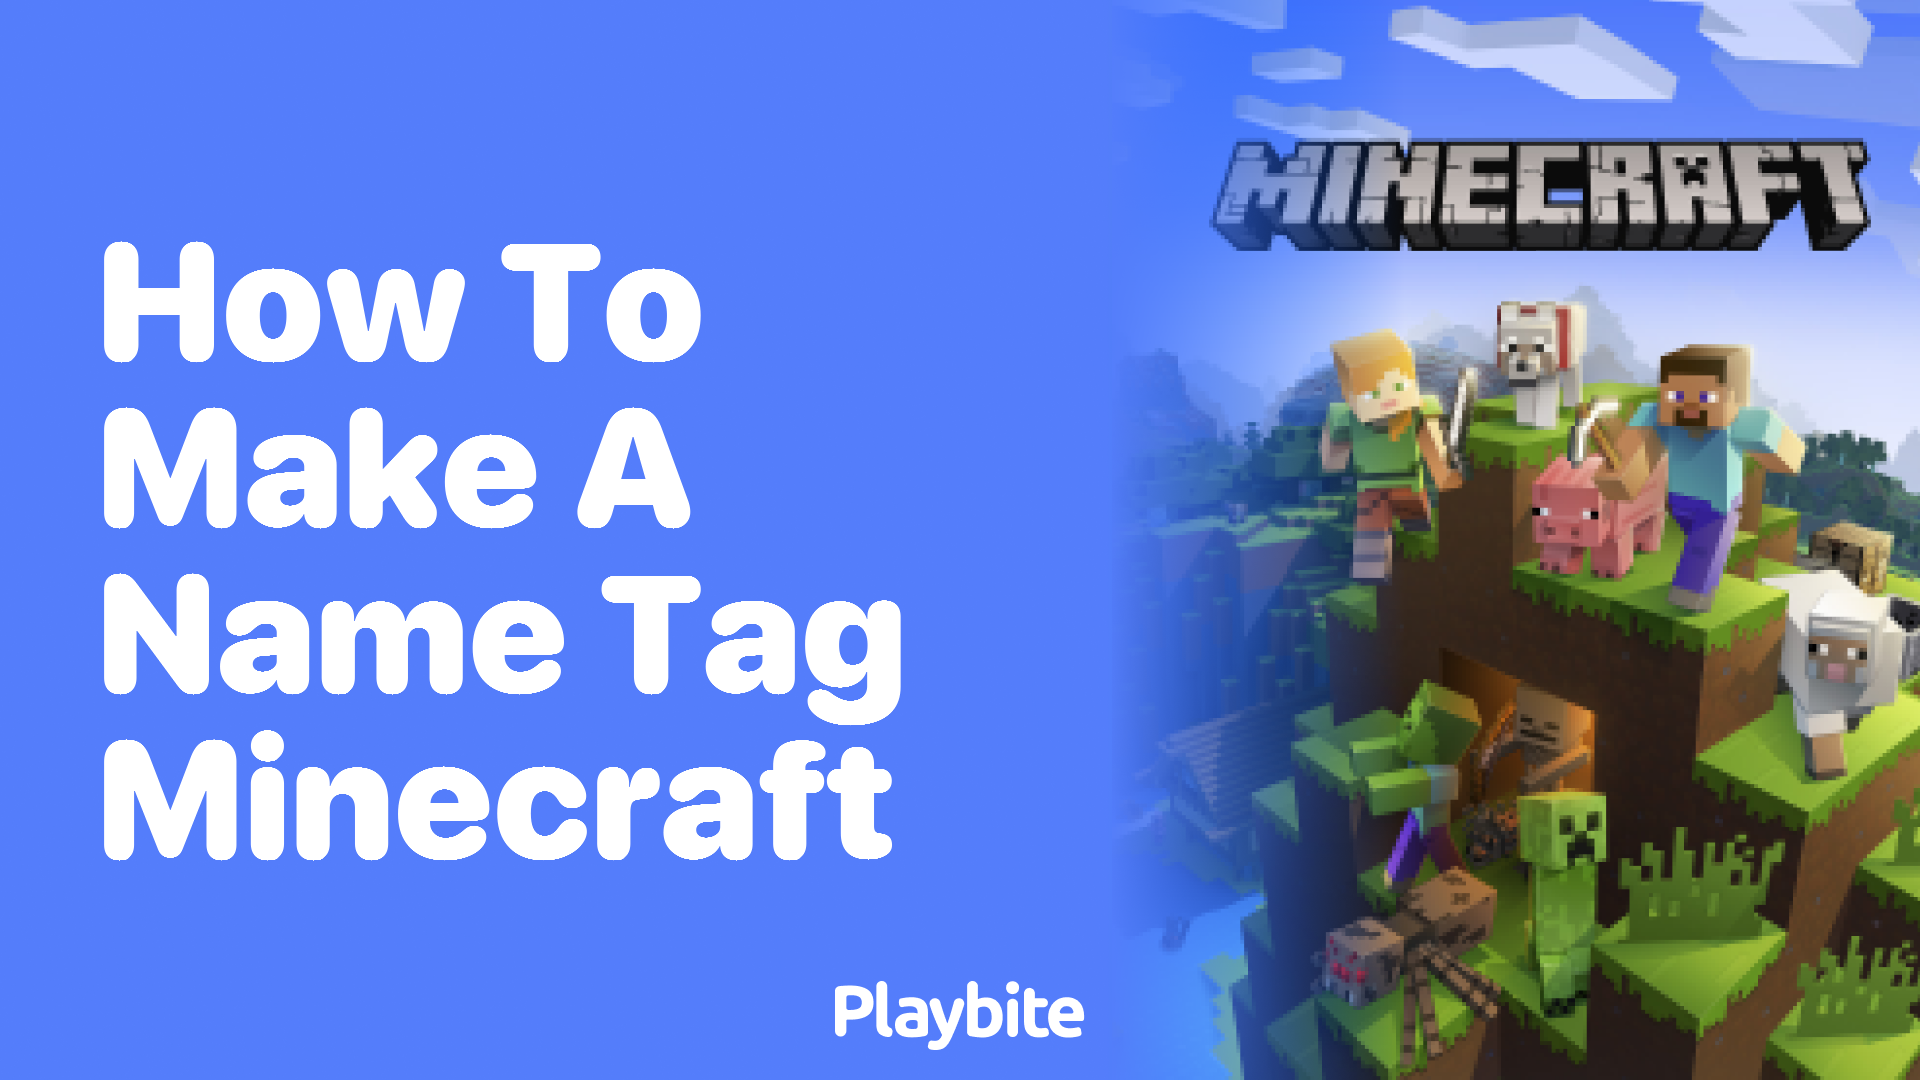 How to Make a Name Tag in Minecraft - Playbite